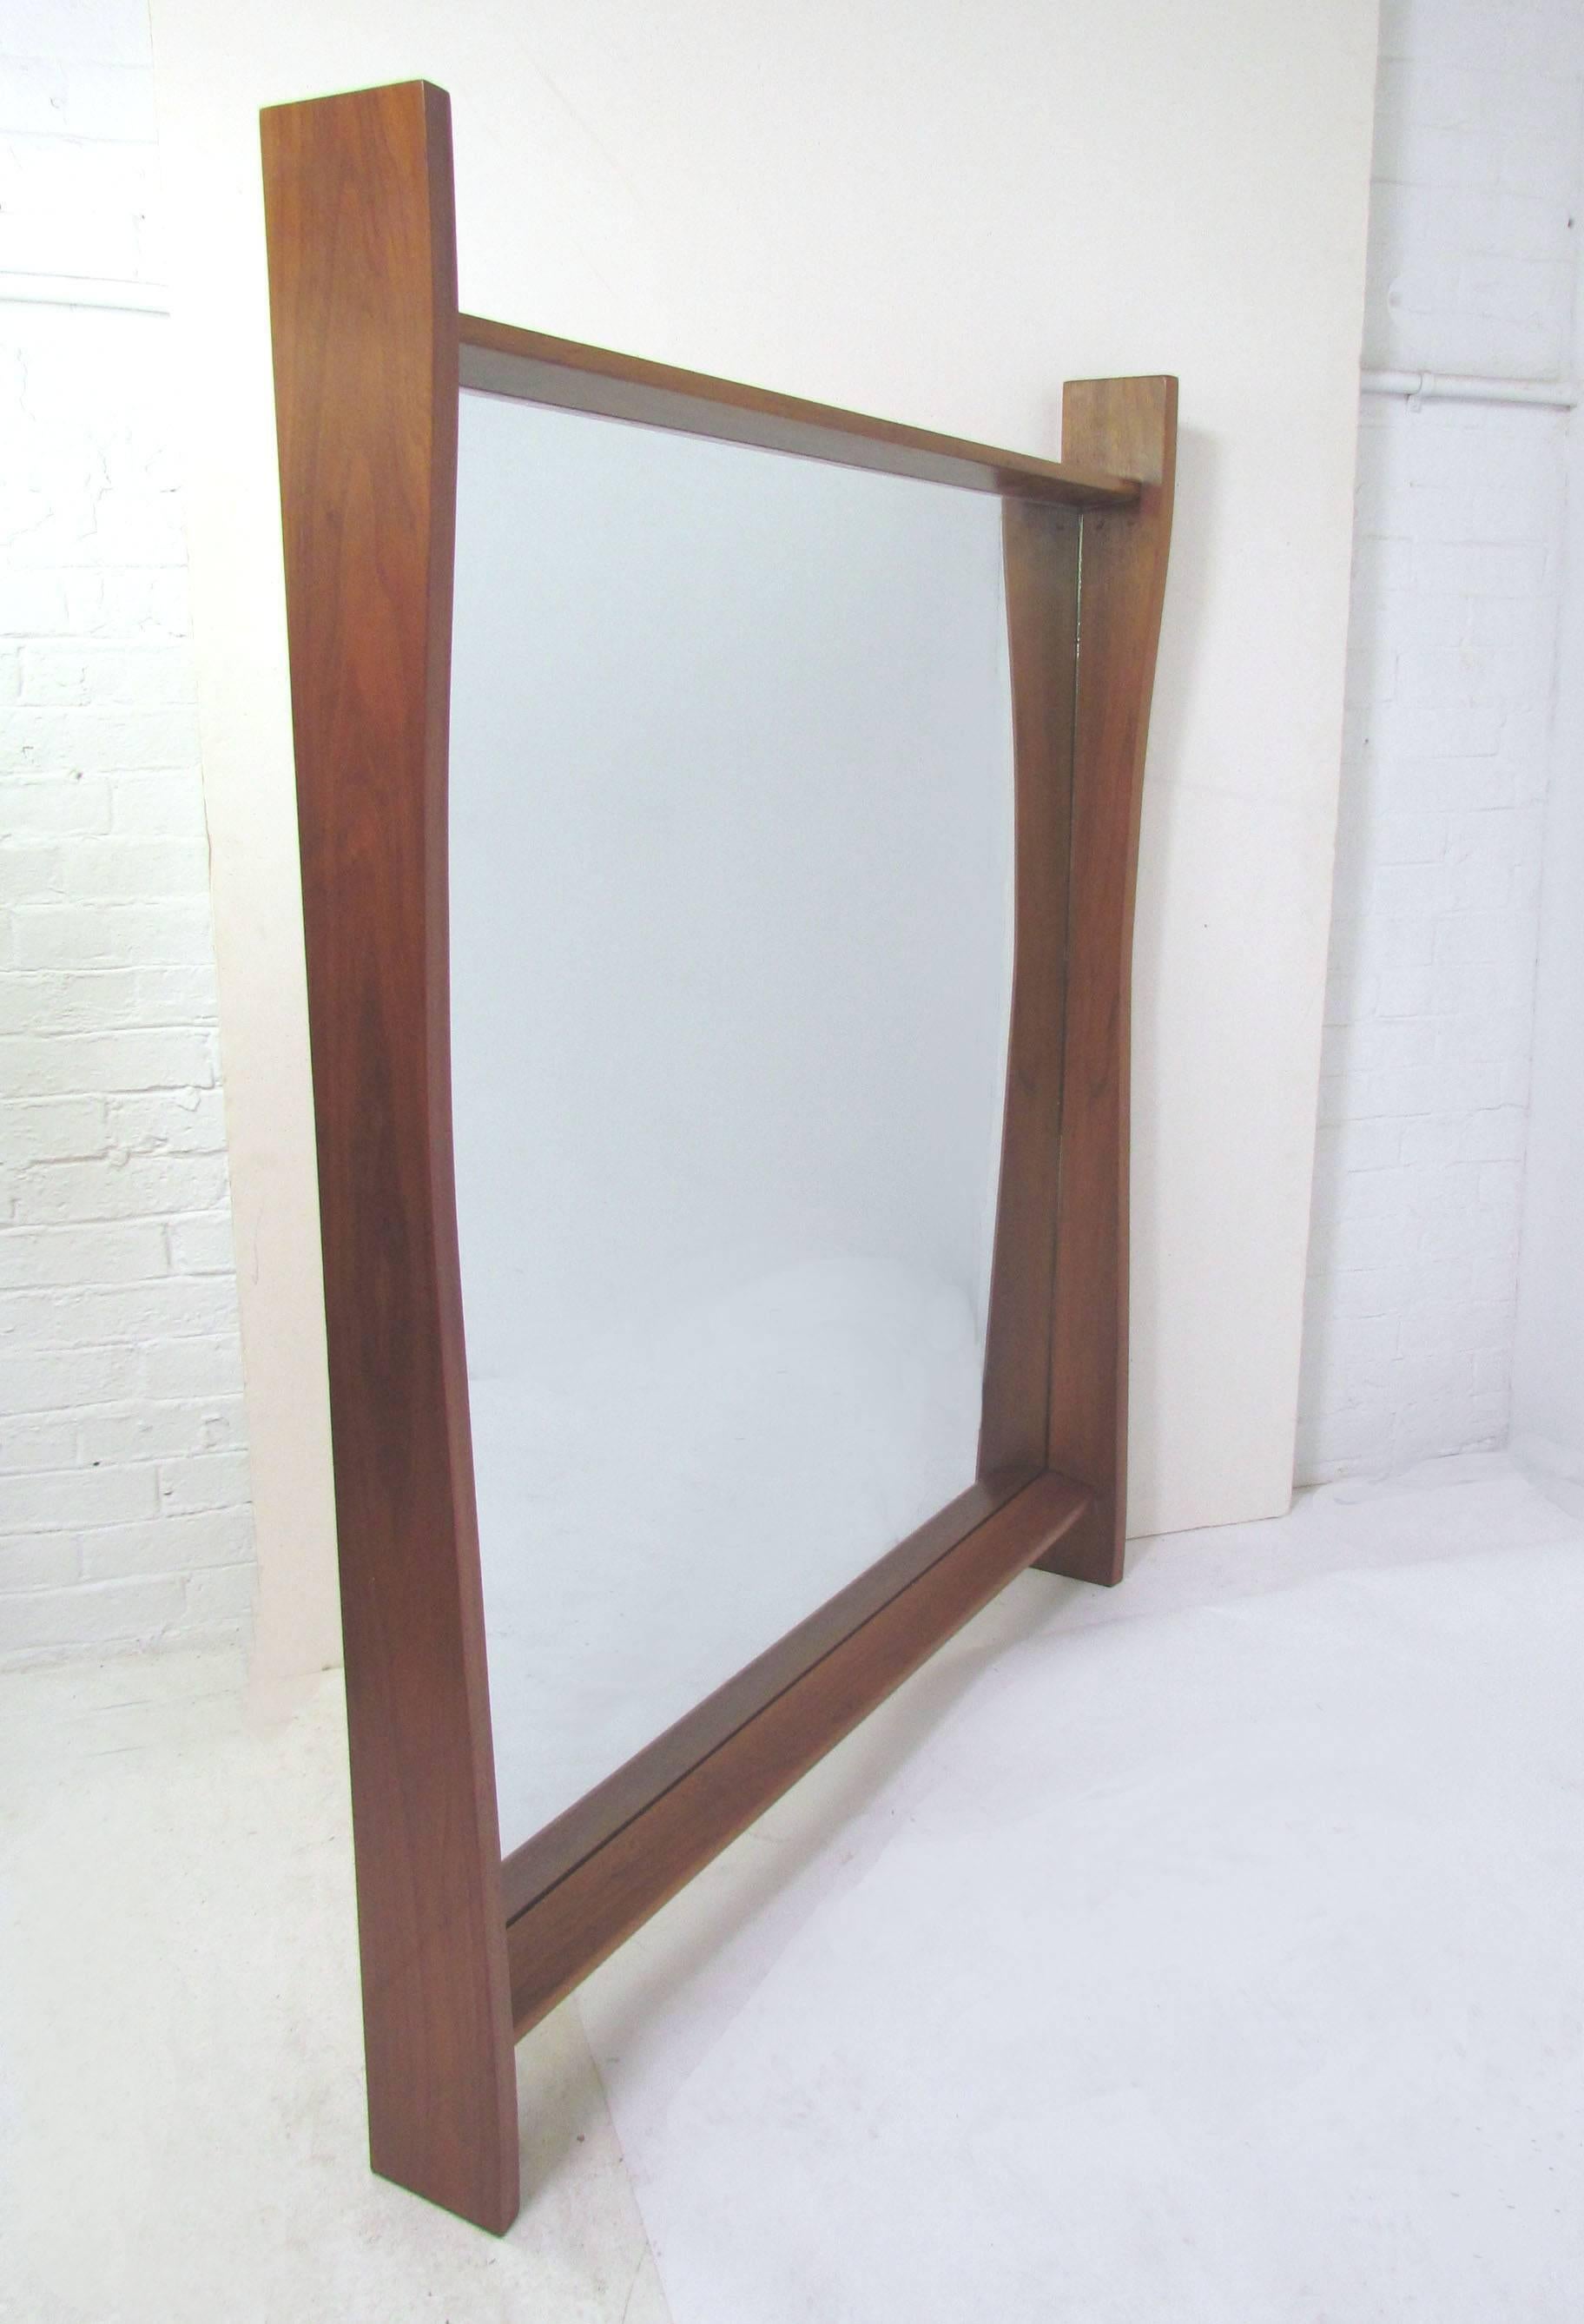 Large Sundra wall mirror in walnut by George Nakashima for Widdicomb Origins Collection, circa 1961.
 